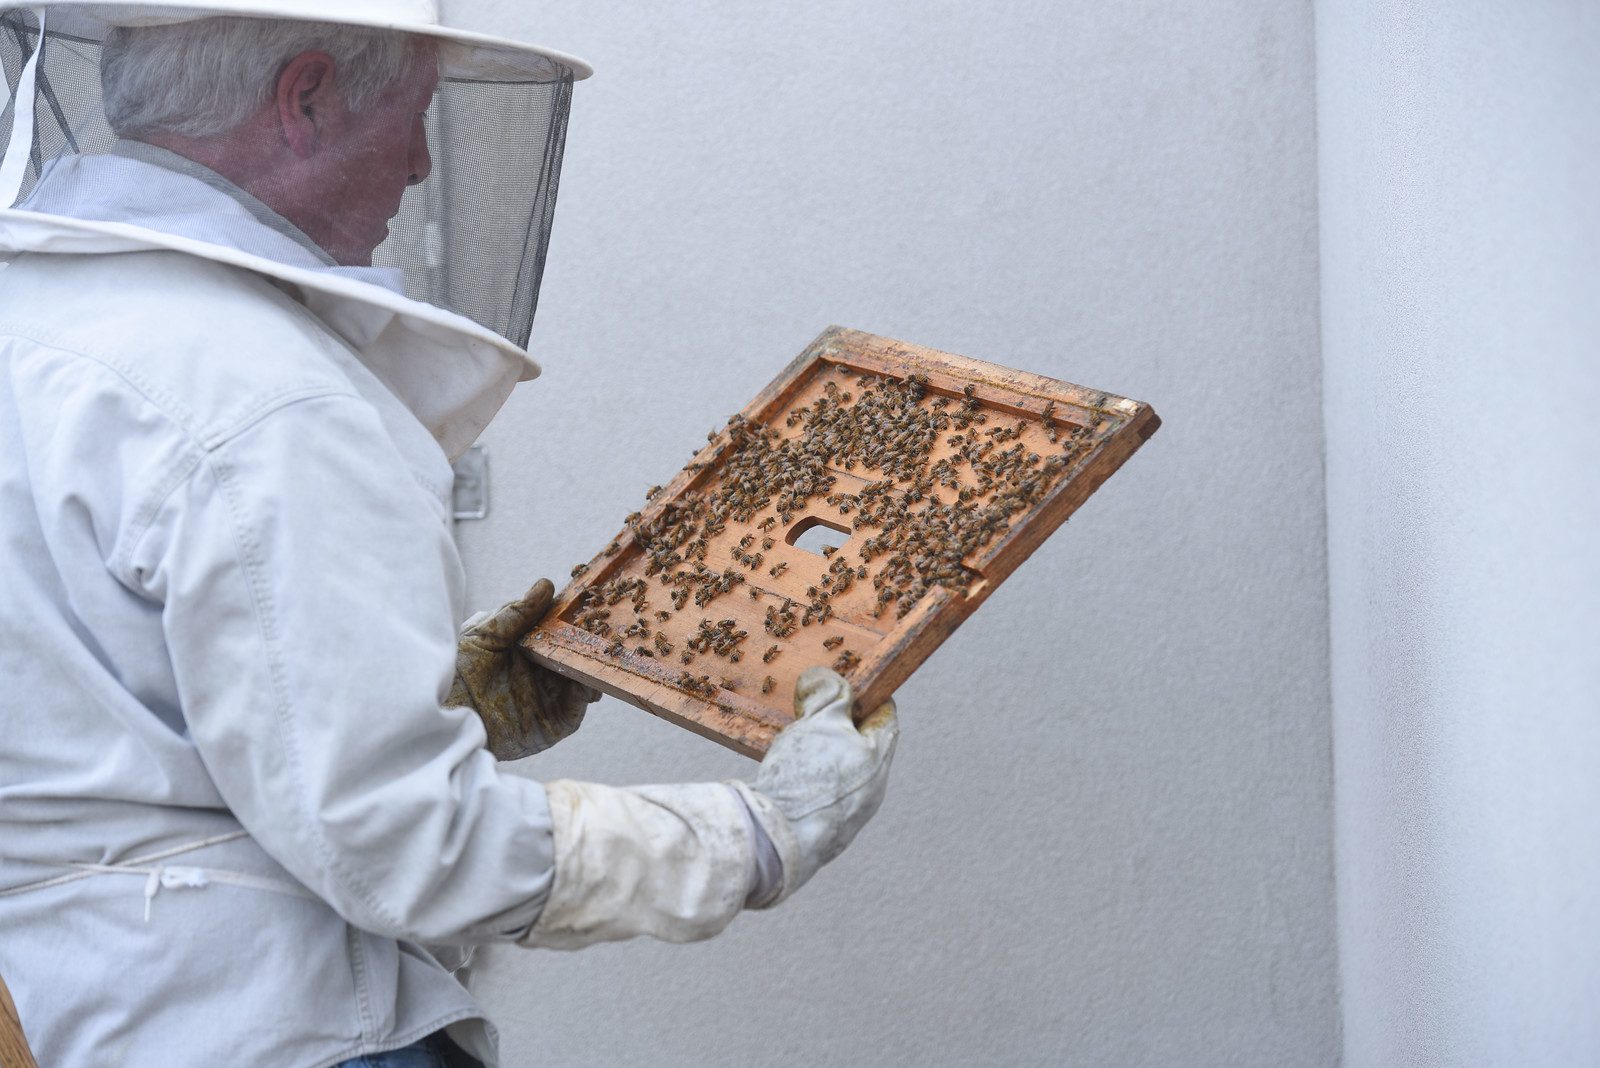 Dr. Fisher with his bees